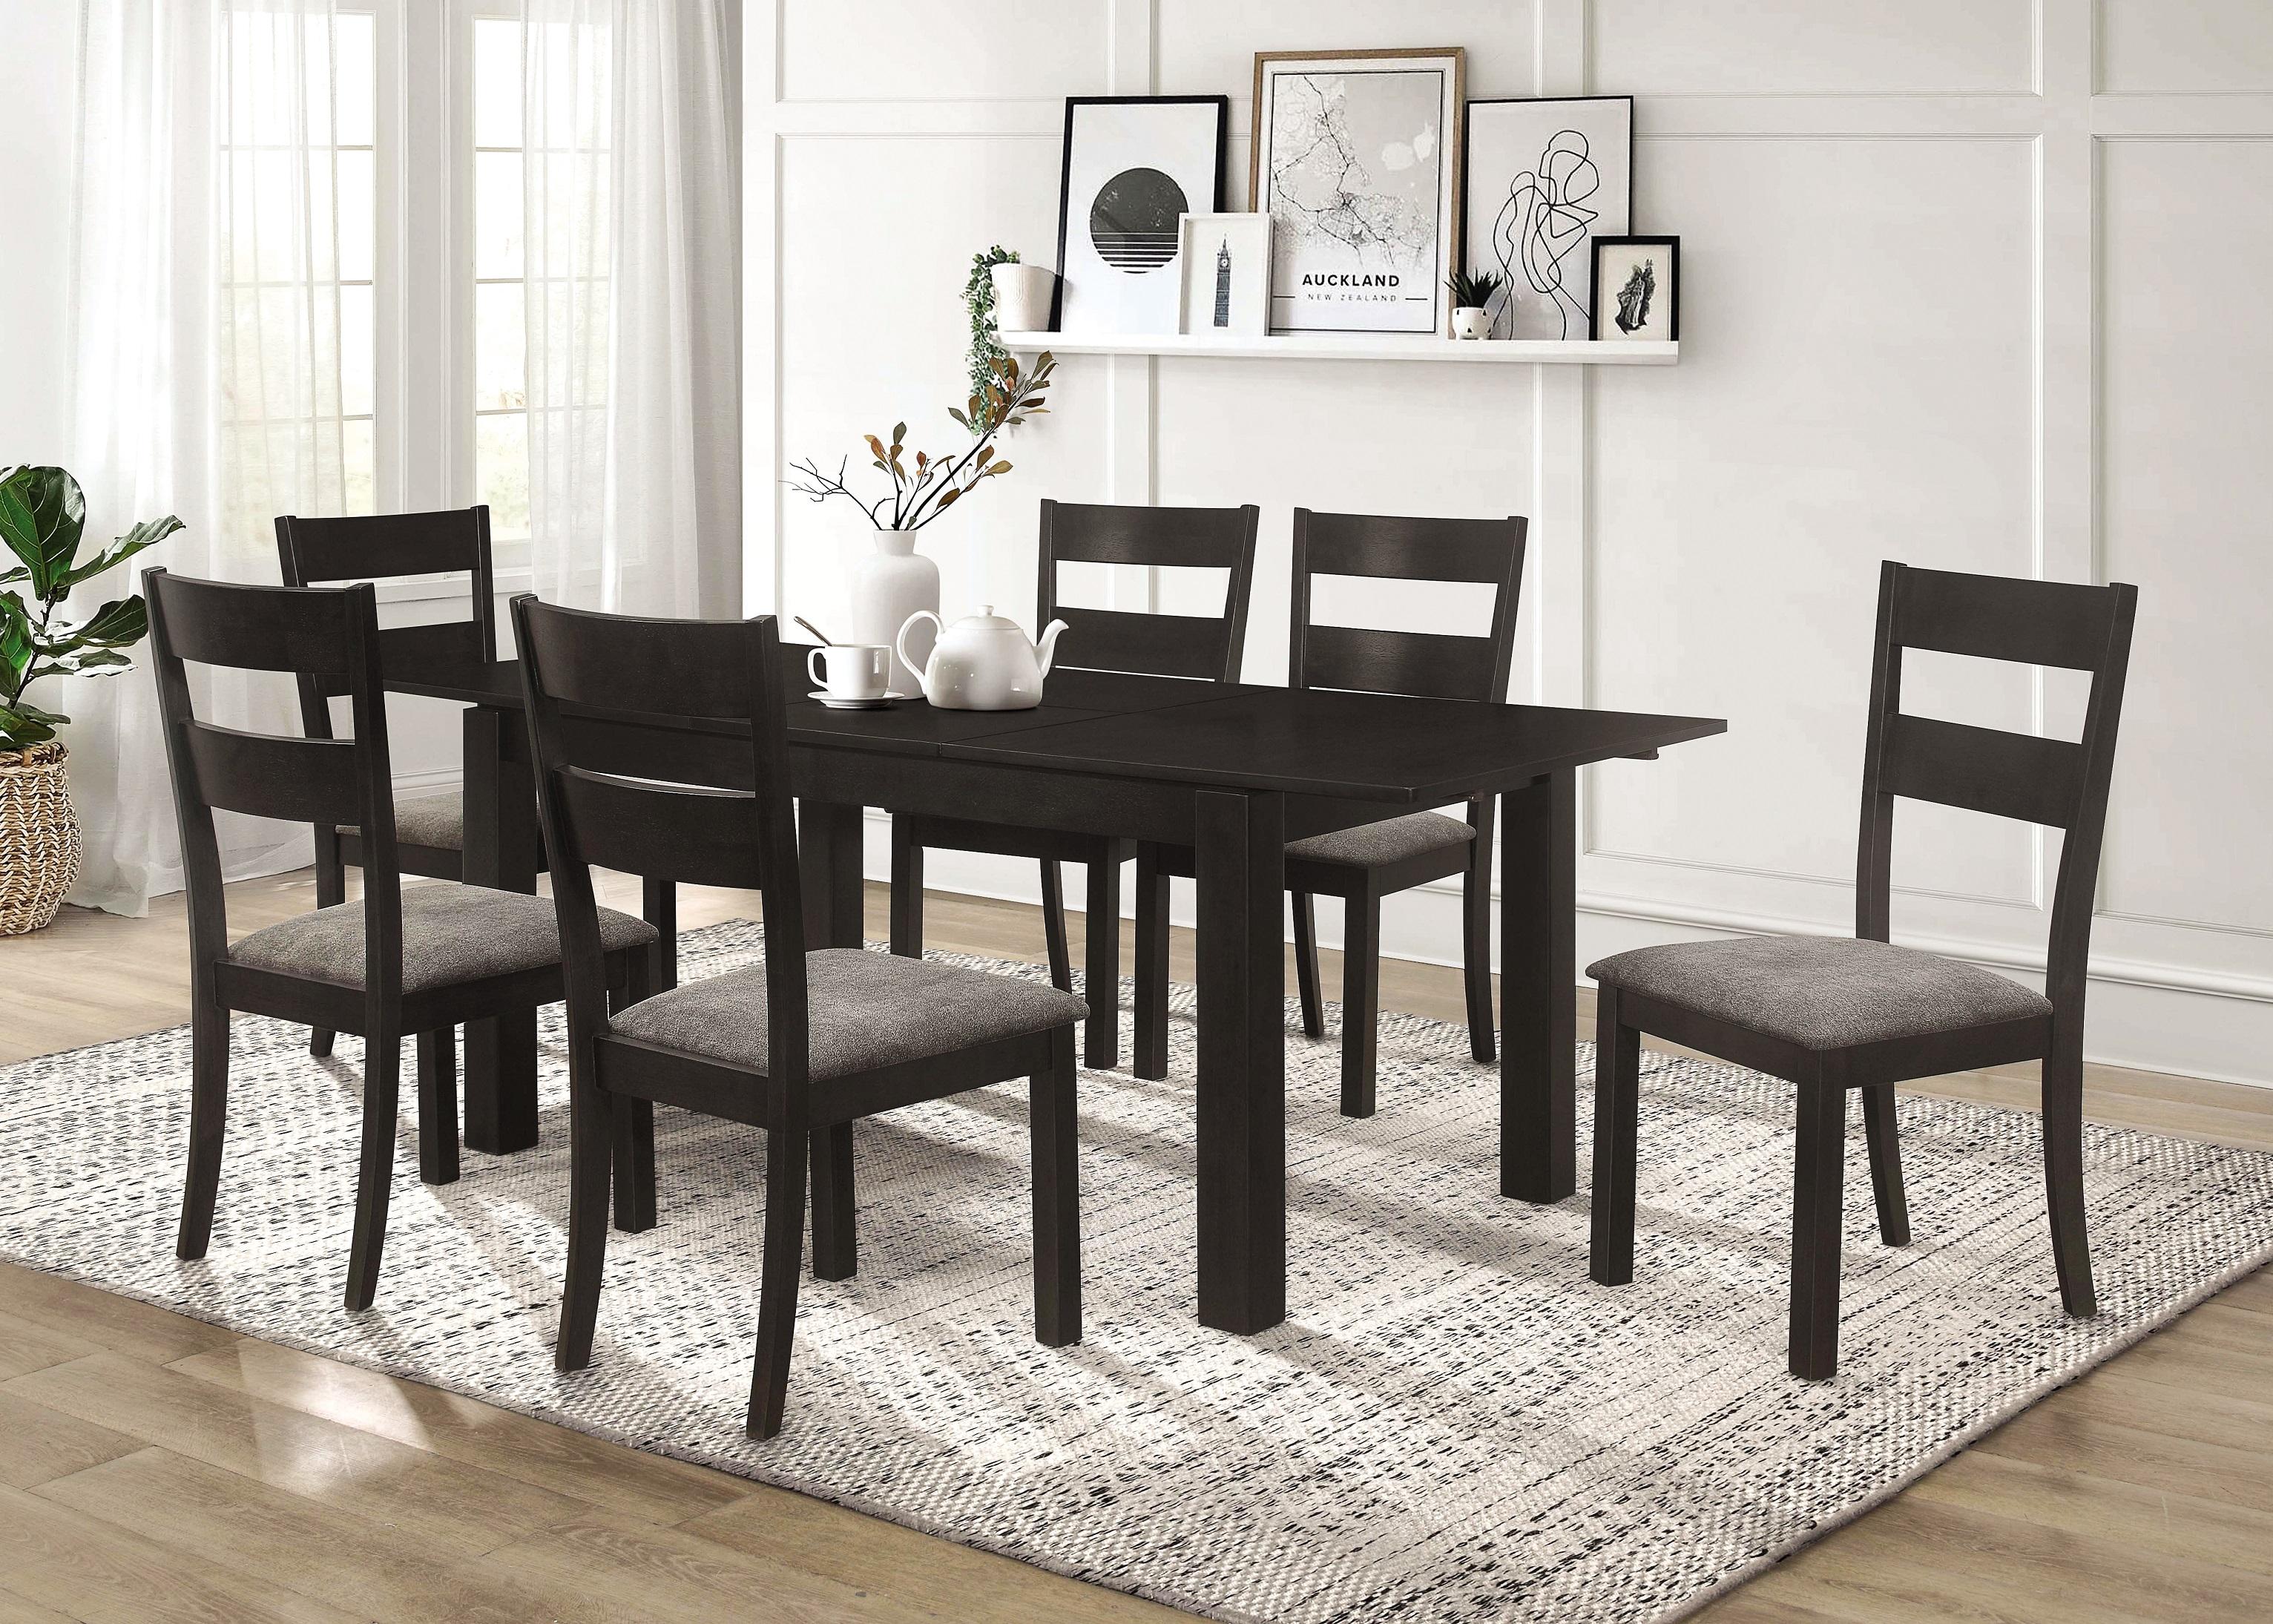 Transitional Dining Room Set 115131-S5 Jakob 115131-S5 in Black Fabric